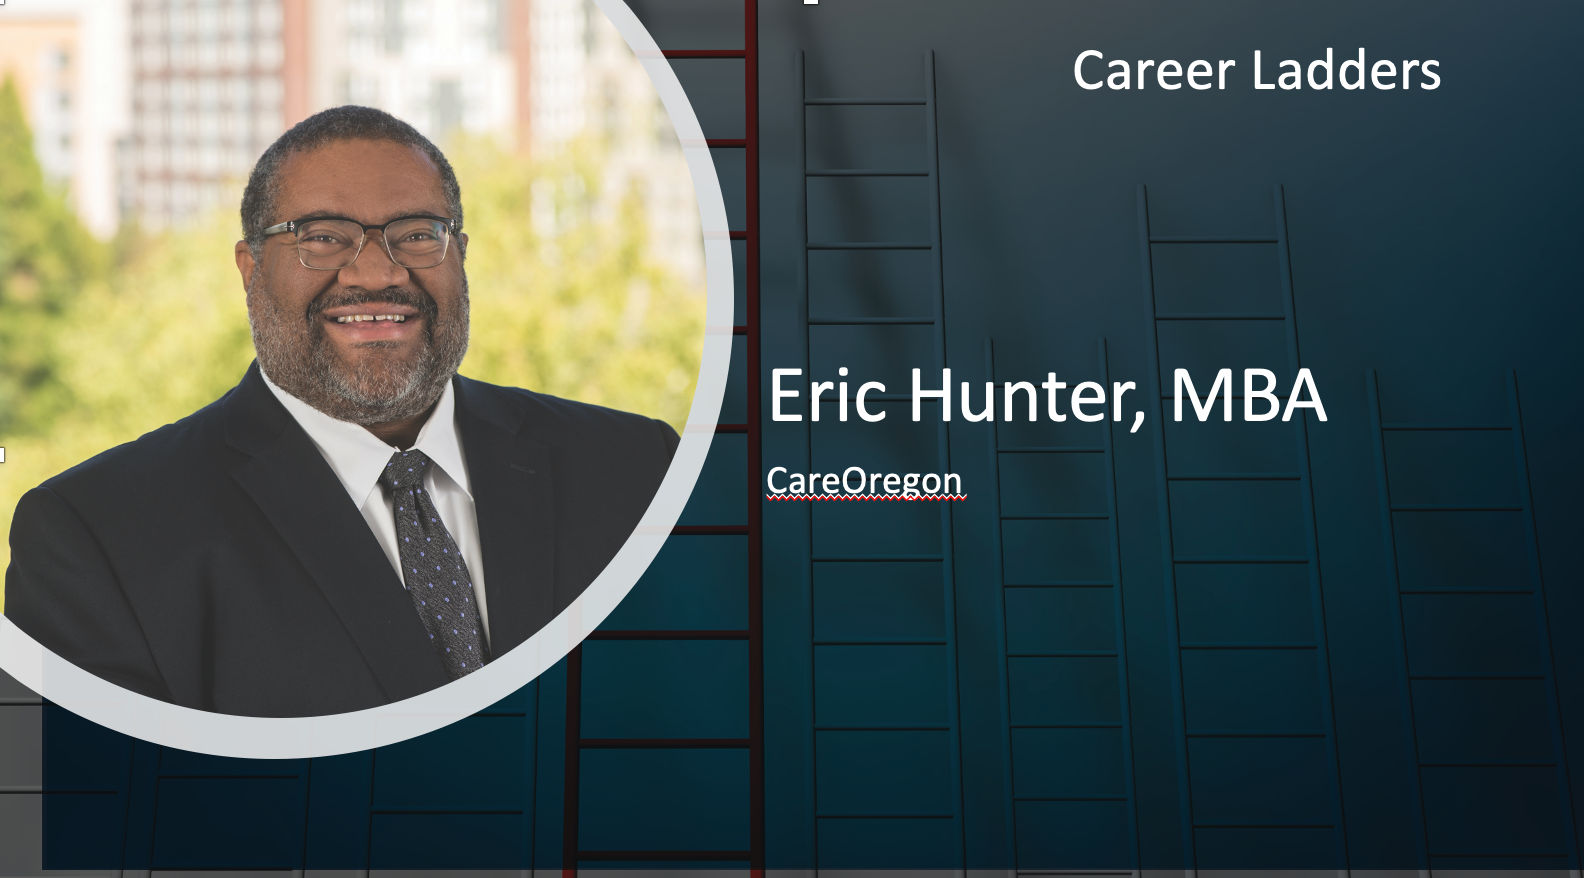 Eric Hunter, MBA, CareOregon: Sharp Turns Lead to New Opportunities